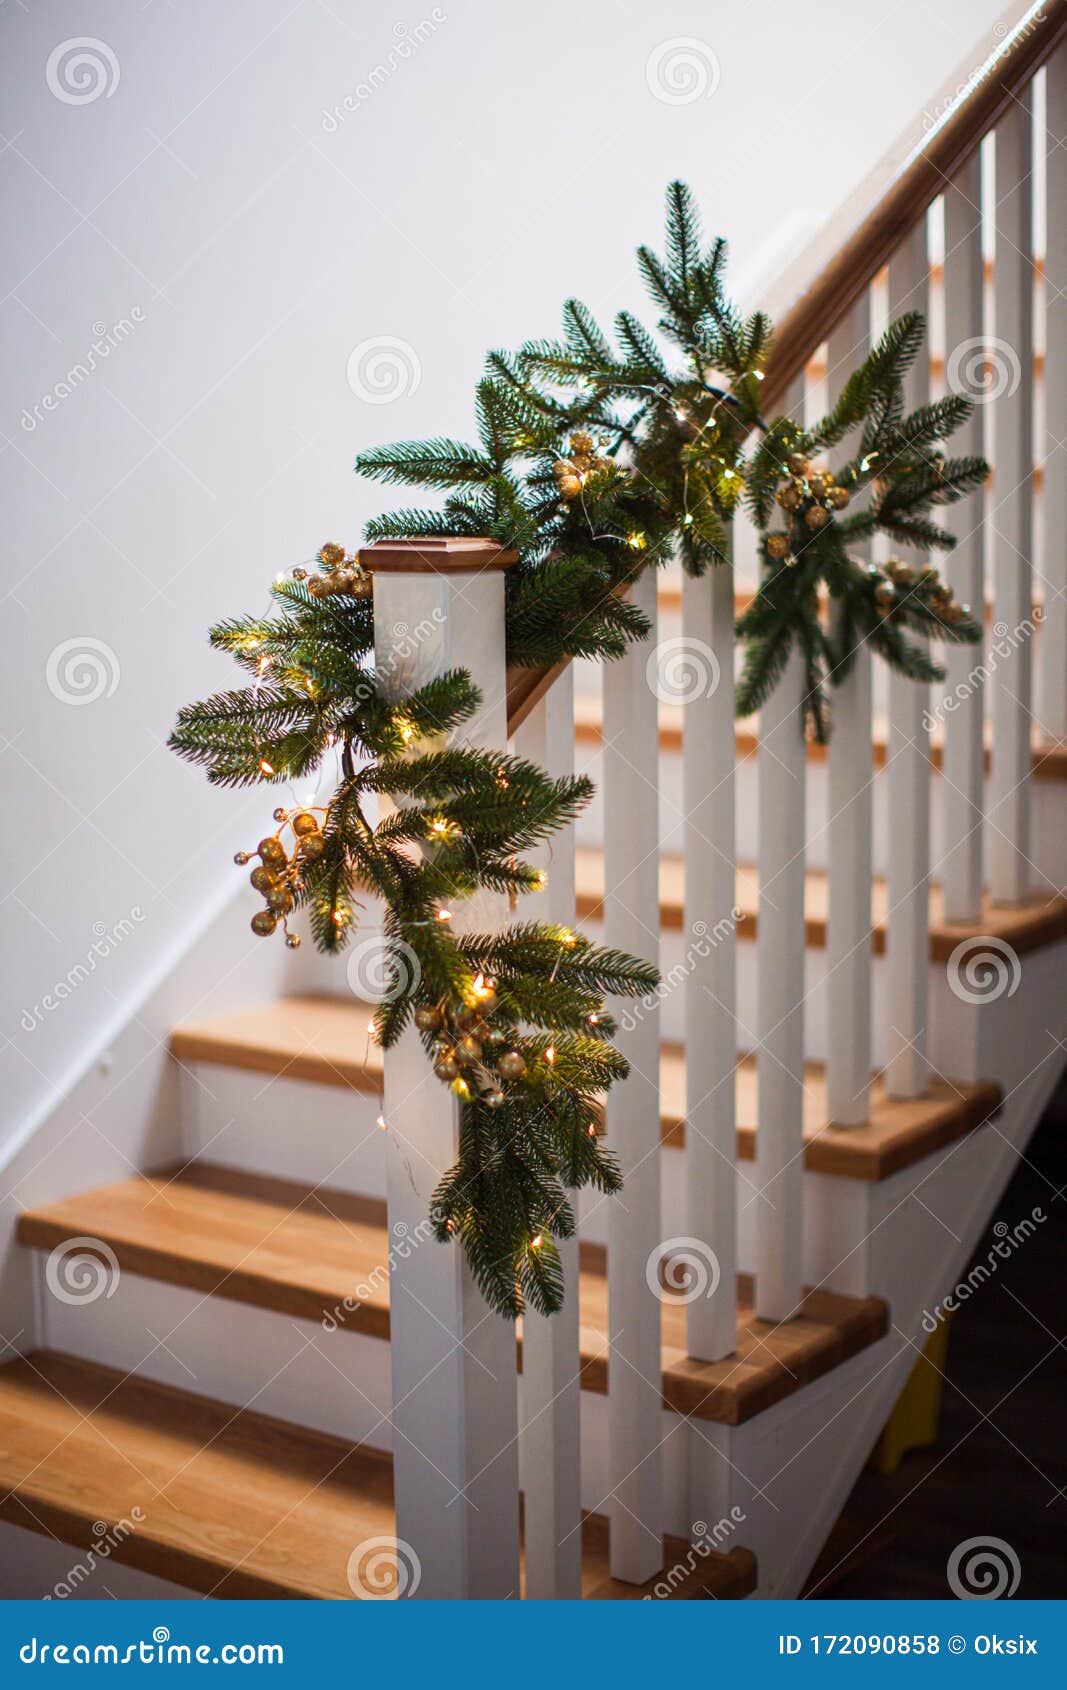 42 Top Images Christmas Decorations Banister - 21 Best Staircase Christmas Decorations Holiday Decor For The Banister